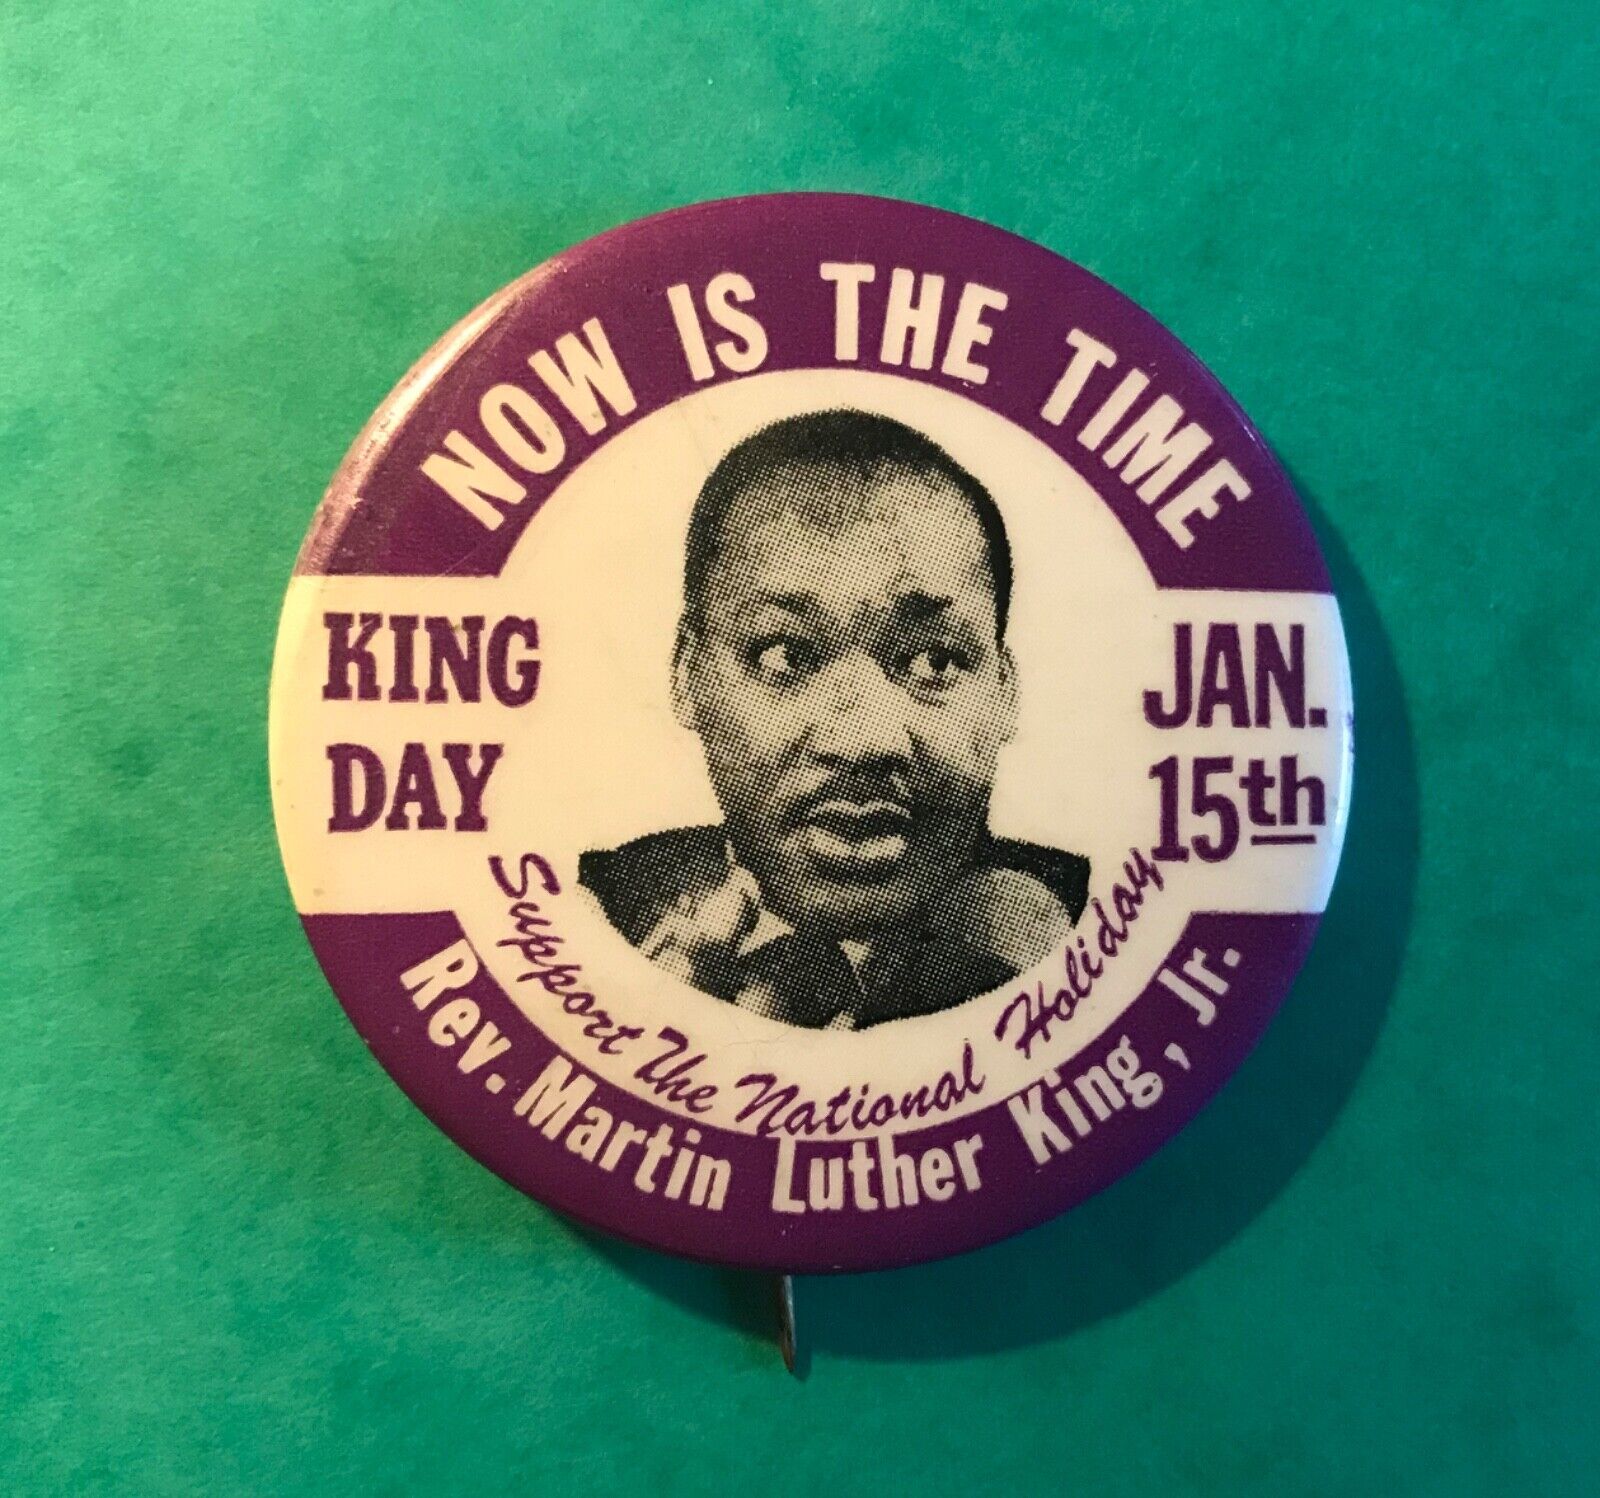 Original hello, pinback button martin luther king now is the time jan.. king day 15th rr